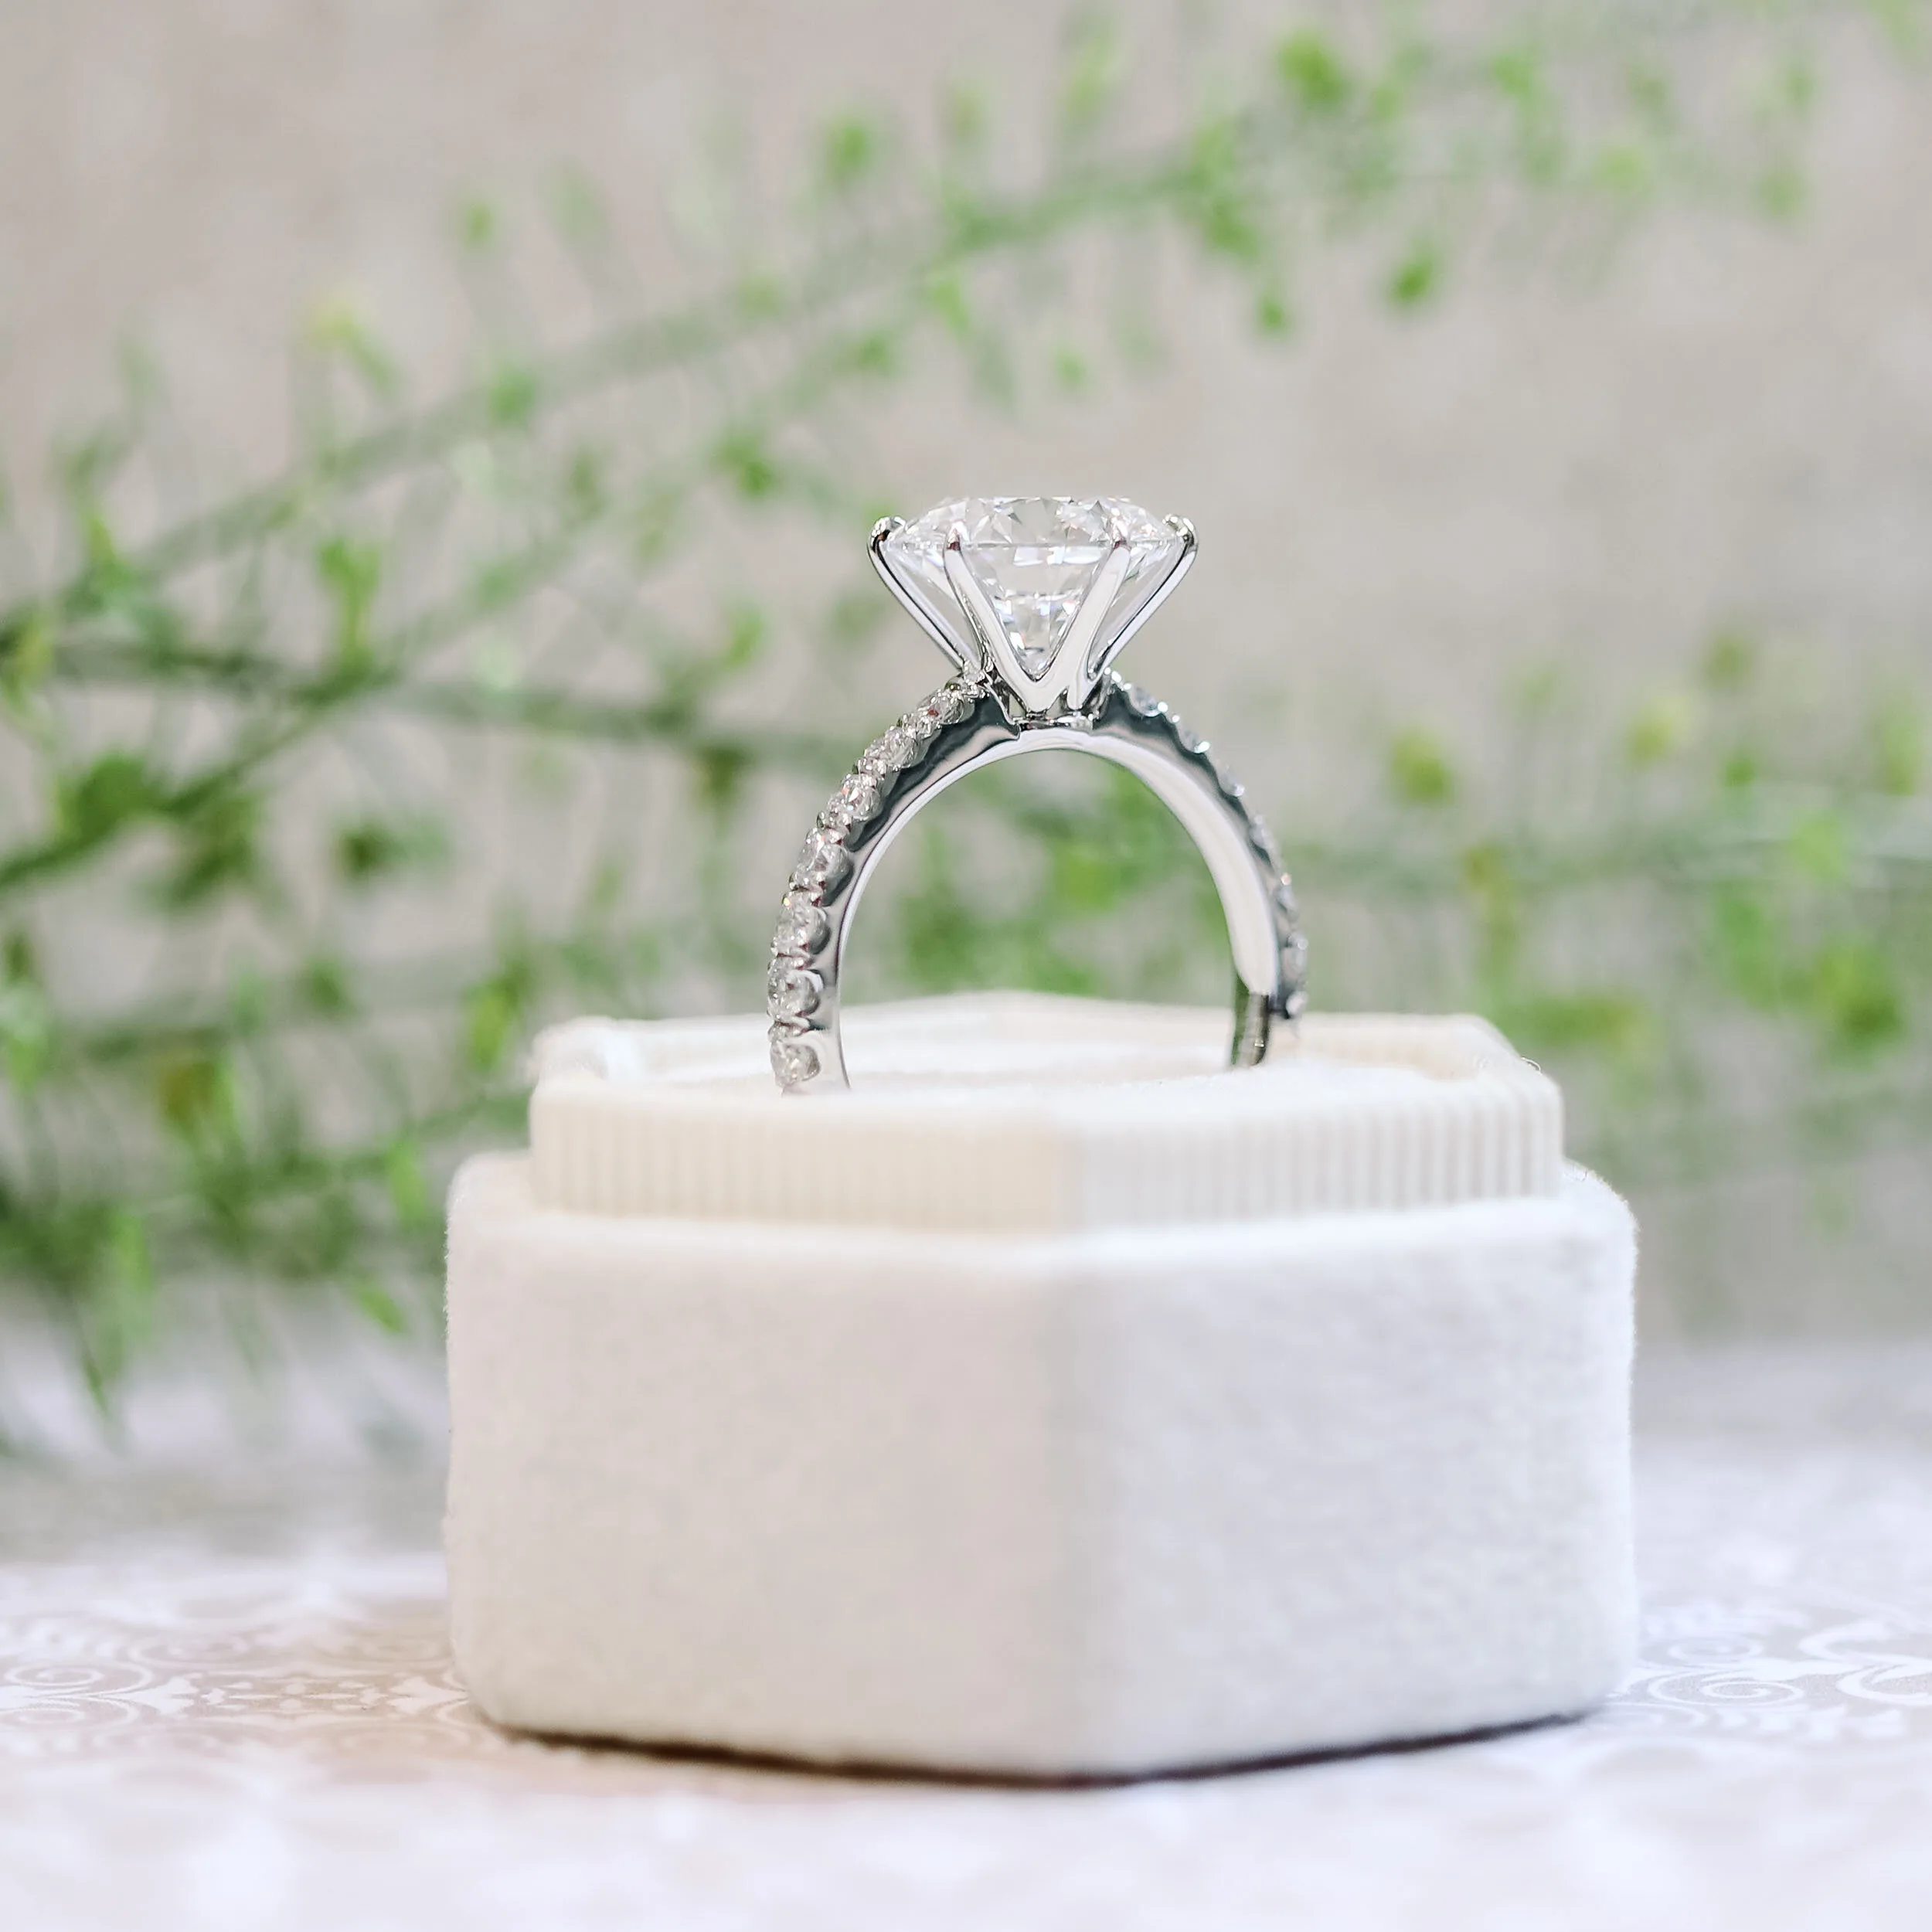 lab-created-six-prong-pave-engagement-ring_1625422090477-DCCK7NGZ99PX1QJYKT6D